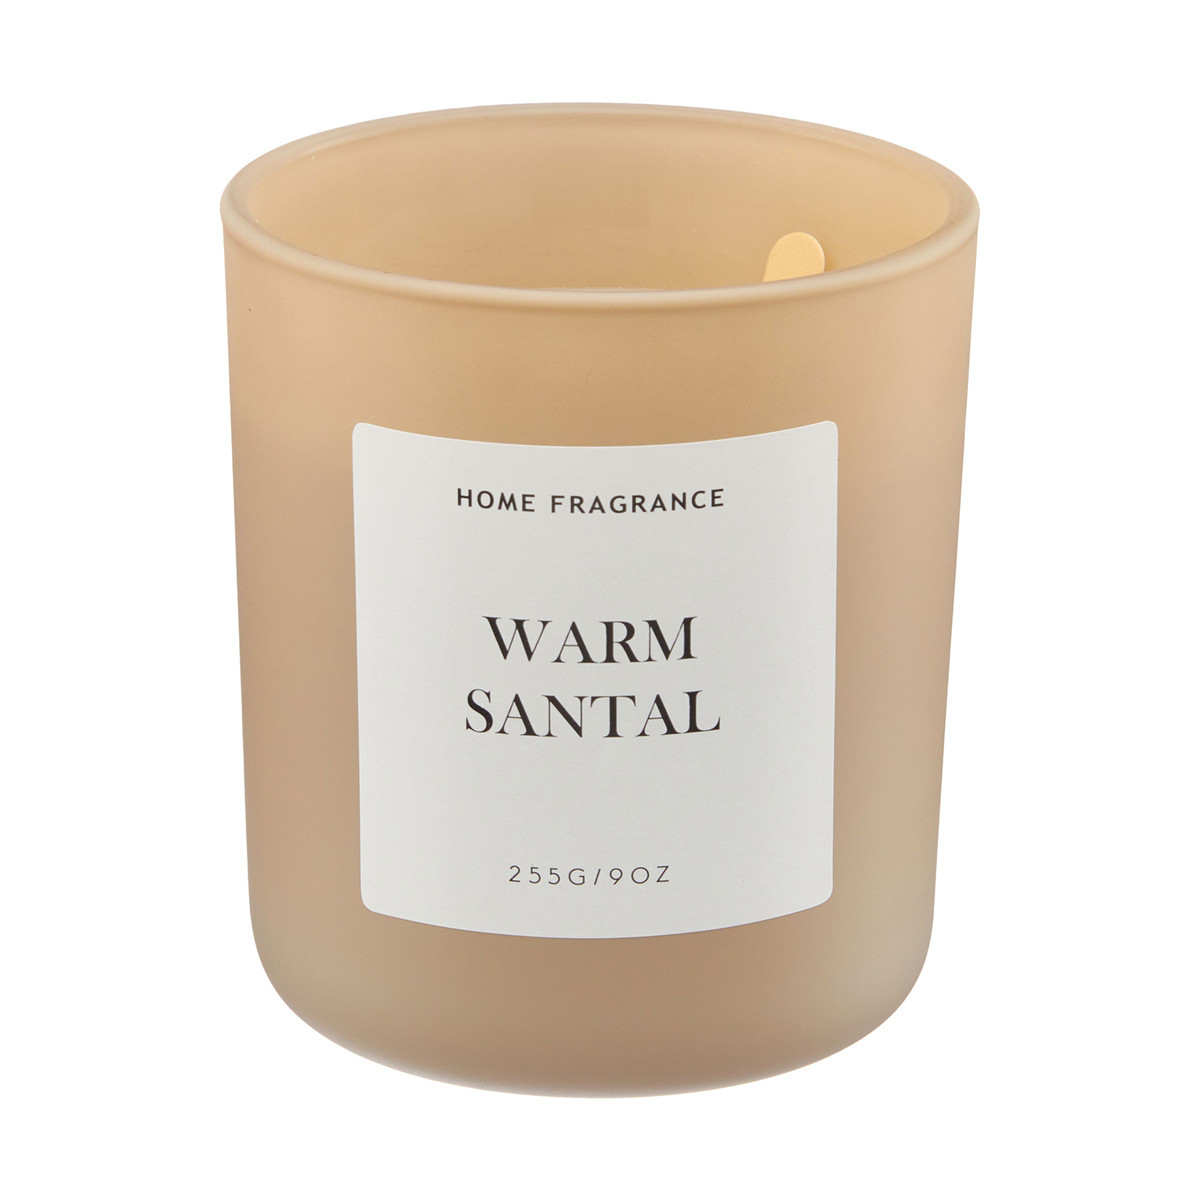 Home Fragrance Warm Santal Scented Candle